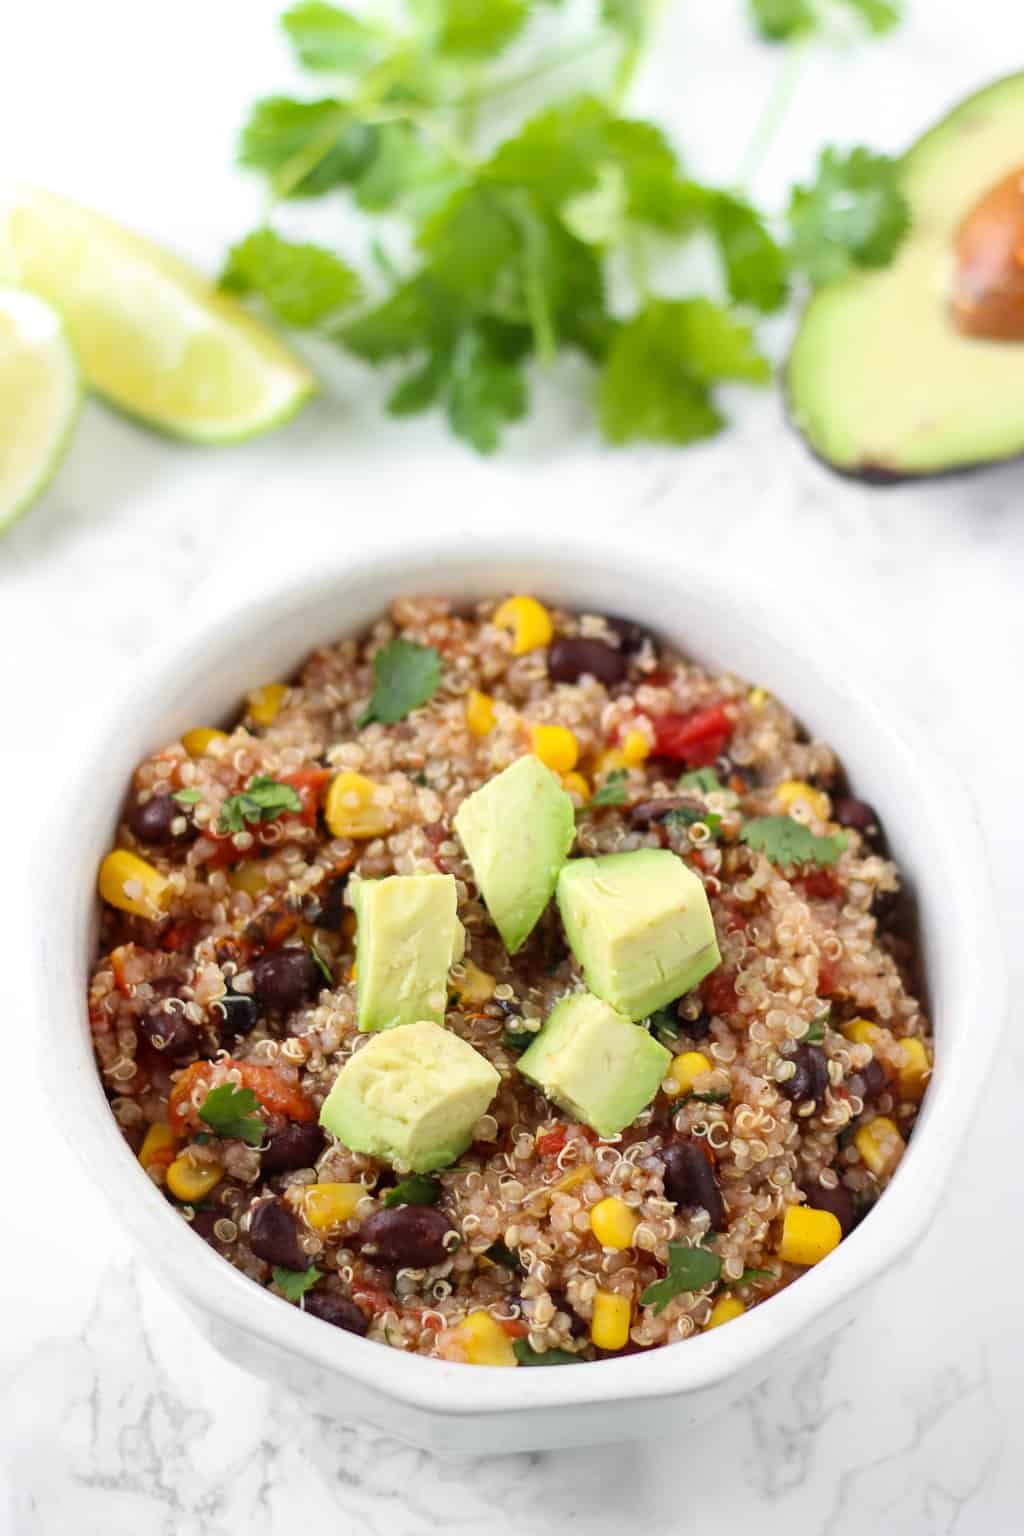 This one-pan Mexican quinoa has just five ingredients. No sautéing or chopping required- just dump the ingredients in the pan!